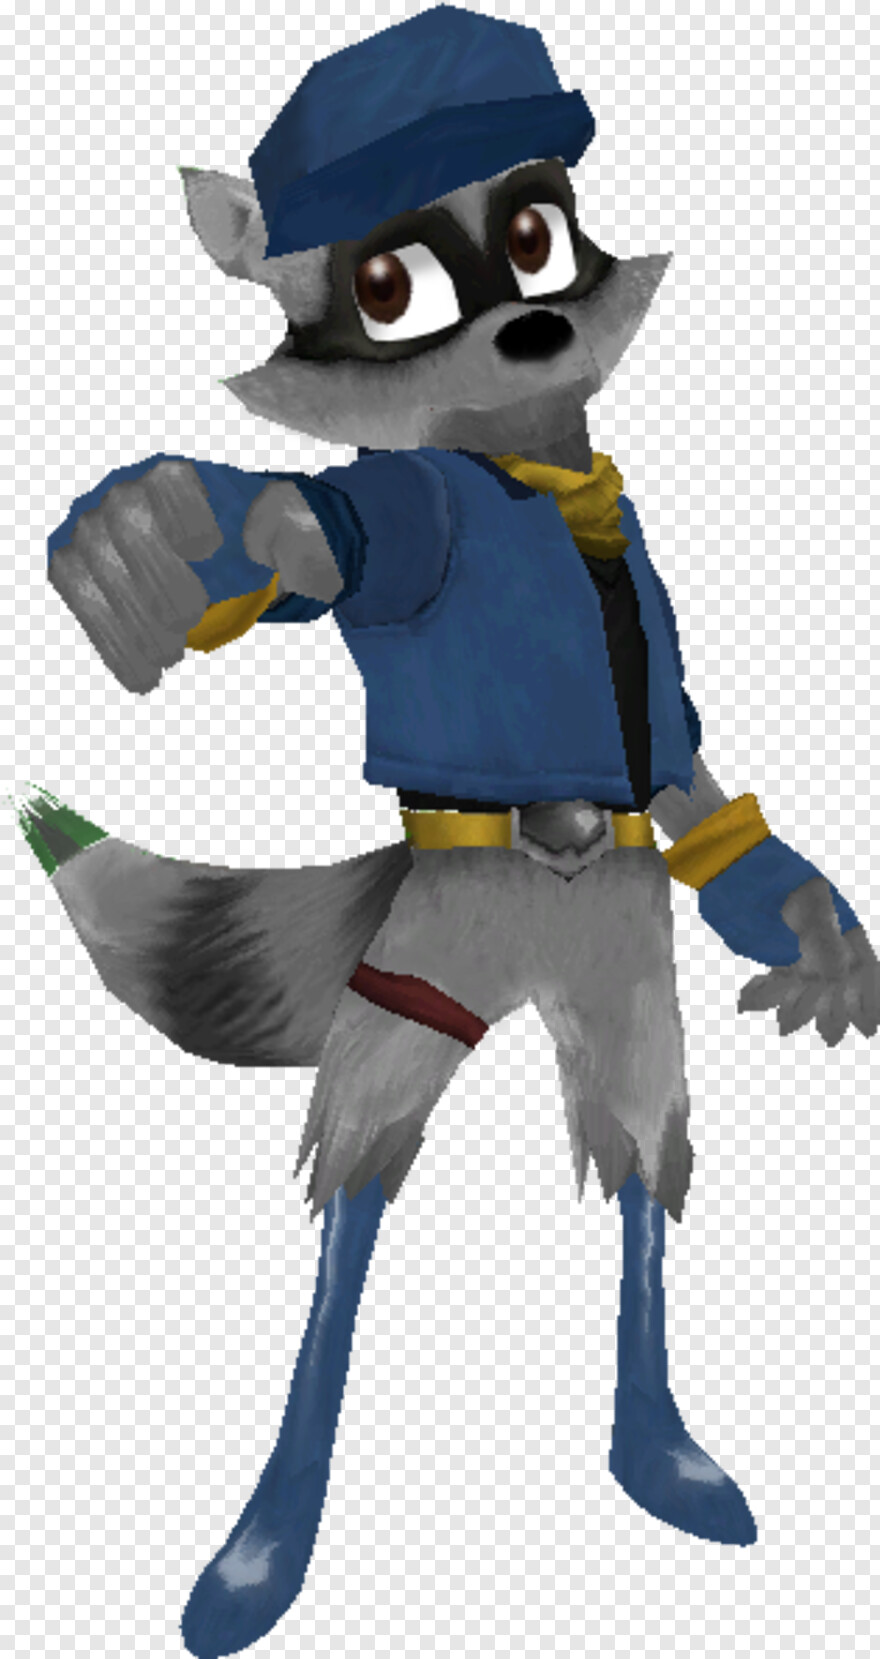 sly-cooper # 958027